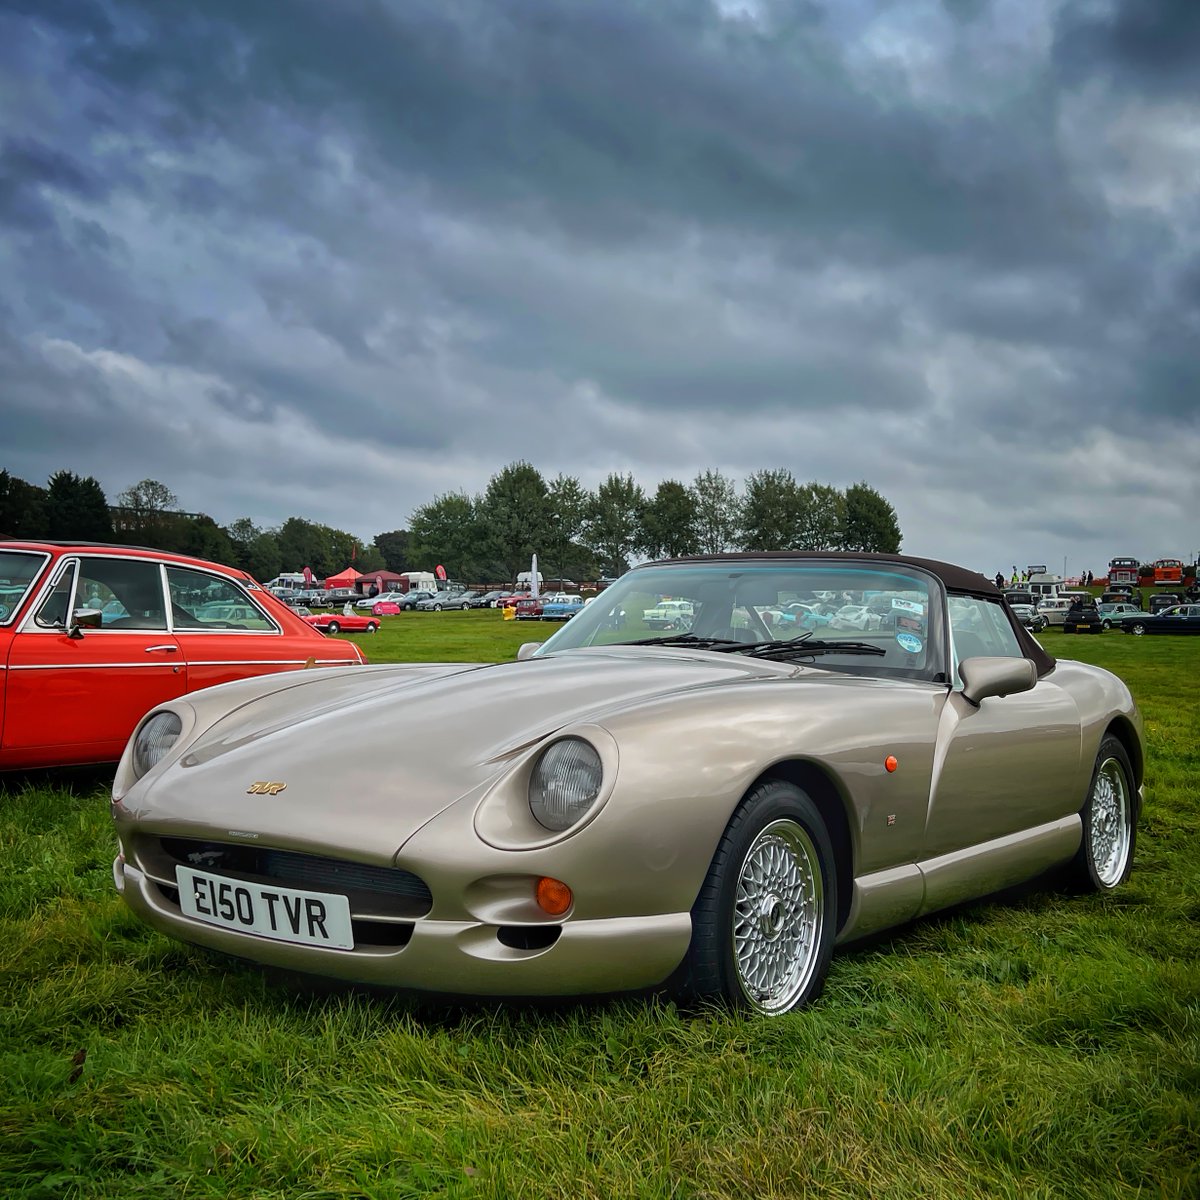 while we're about it let's have one more look at that gorgeous Chimaera

full-res downloads, prints, wall art and gifts in the #YorkHistoricVehicleGroup gallery on pmhimages.com

#TVR #chimaera #car #cars #carenthusiast #carenthusiasts #petrolheads #britishmotors